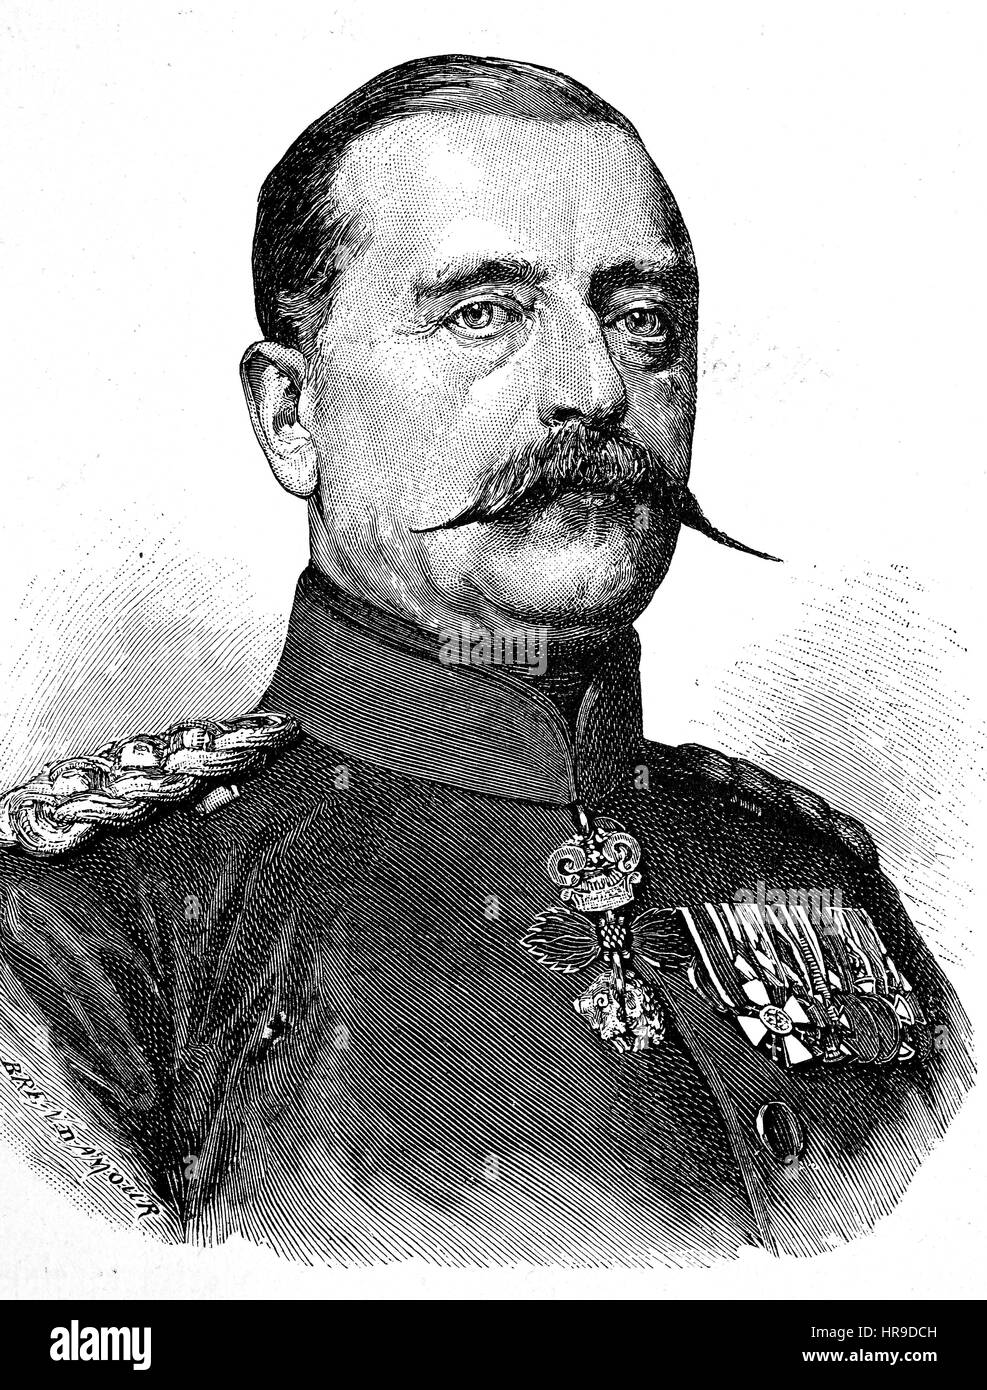 Prince Karl Anton of Hohenzollern-Sigmaringen, Karl Anton Joachim Zephyrinus Friedrich Meinrad Fuerst von Hohenzollern-Sigmaringen, 1811 - 1885, was head of the Princely House of Hohenzollern-Sigmaringen, Hohenzollern from 1869 and Prime Minister of Prussia, Situation from the time of The Franco-Prussian War or Franco-German War,  Deutsch-Franzoesischer Krieg, 1870-1871, Reproduction of an original woodcut from the year 1885, digital improved Stock Photo